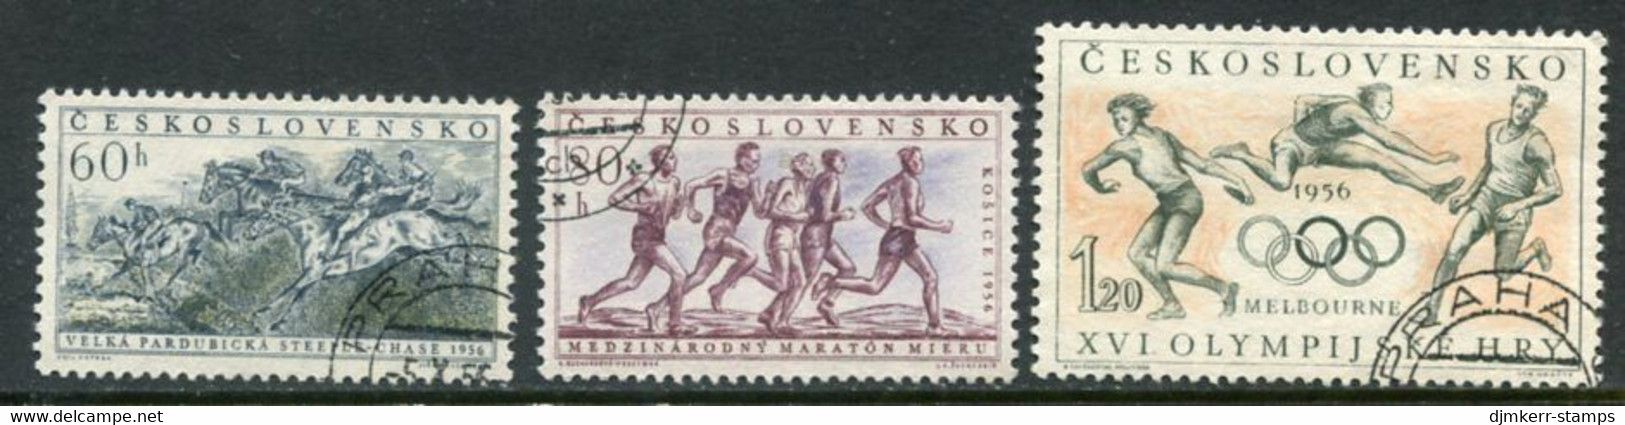 CZECHOSLOVAKIA 1956 Sports Events II  Used.  Michel 981-83 - Used Stamps